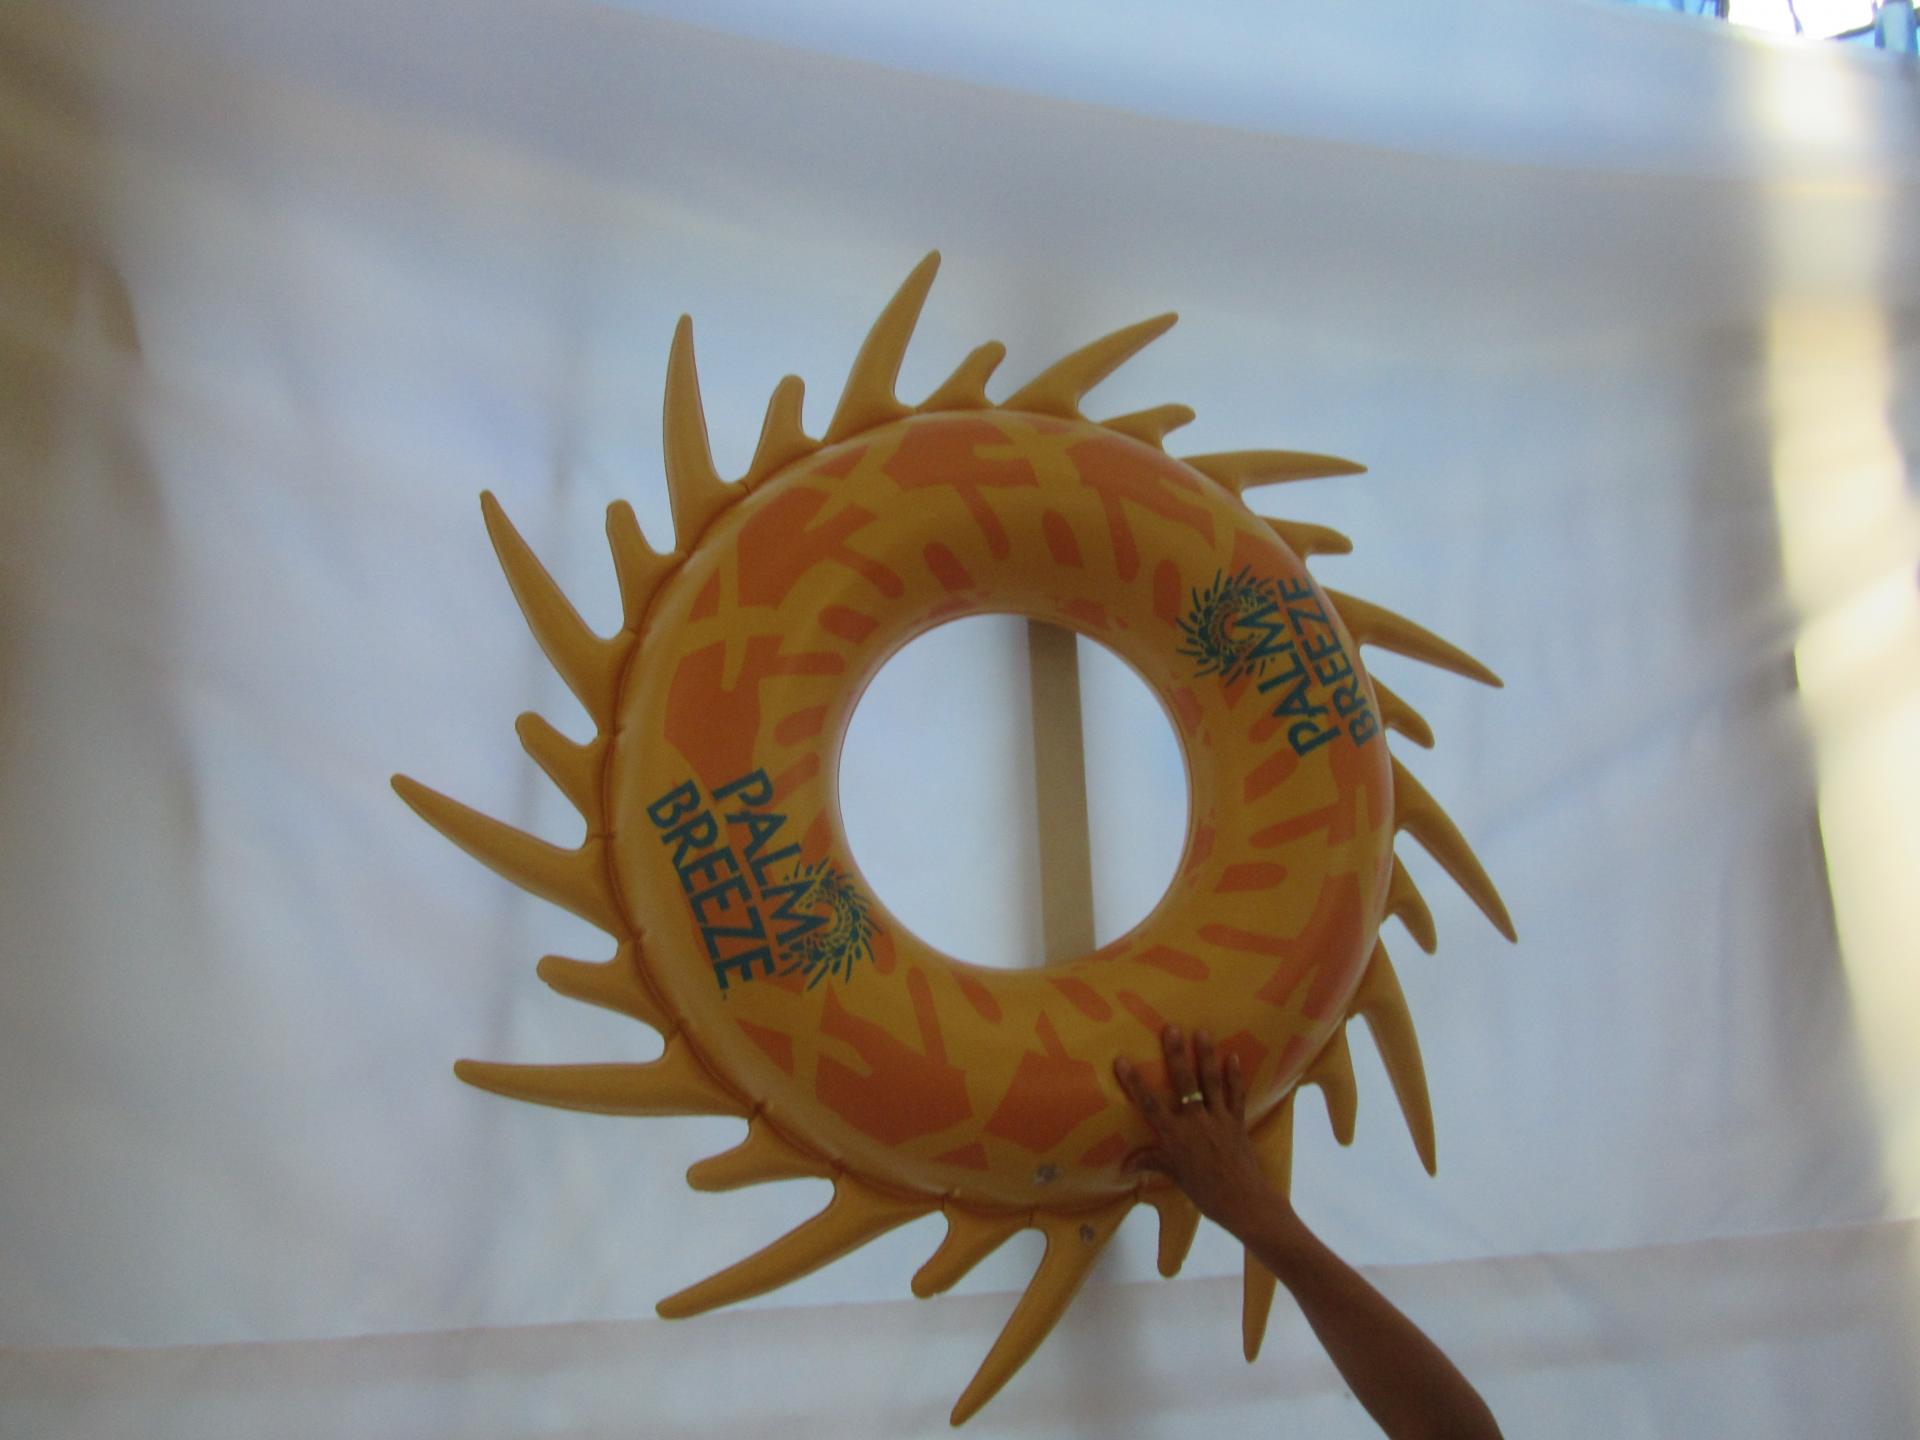 Customised Inflatable Sun Wheel Swim Ring Swimming Rings Donuts For Children & Adults